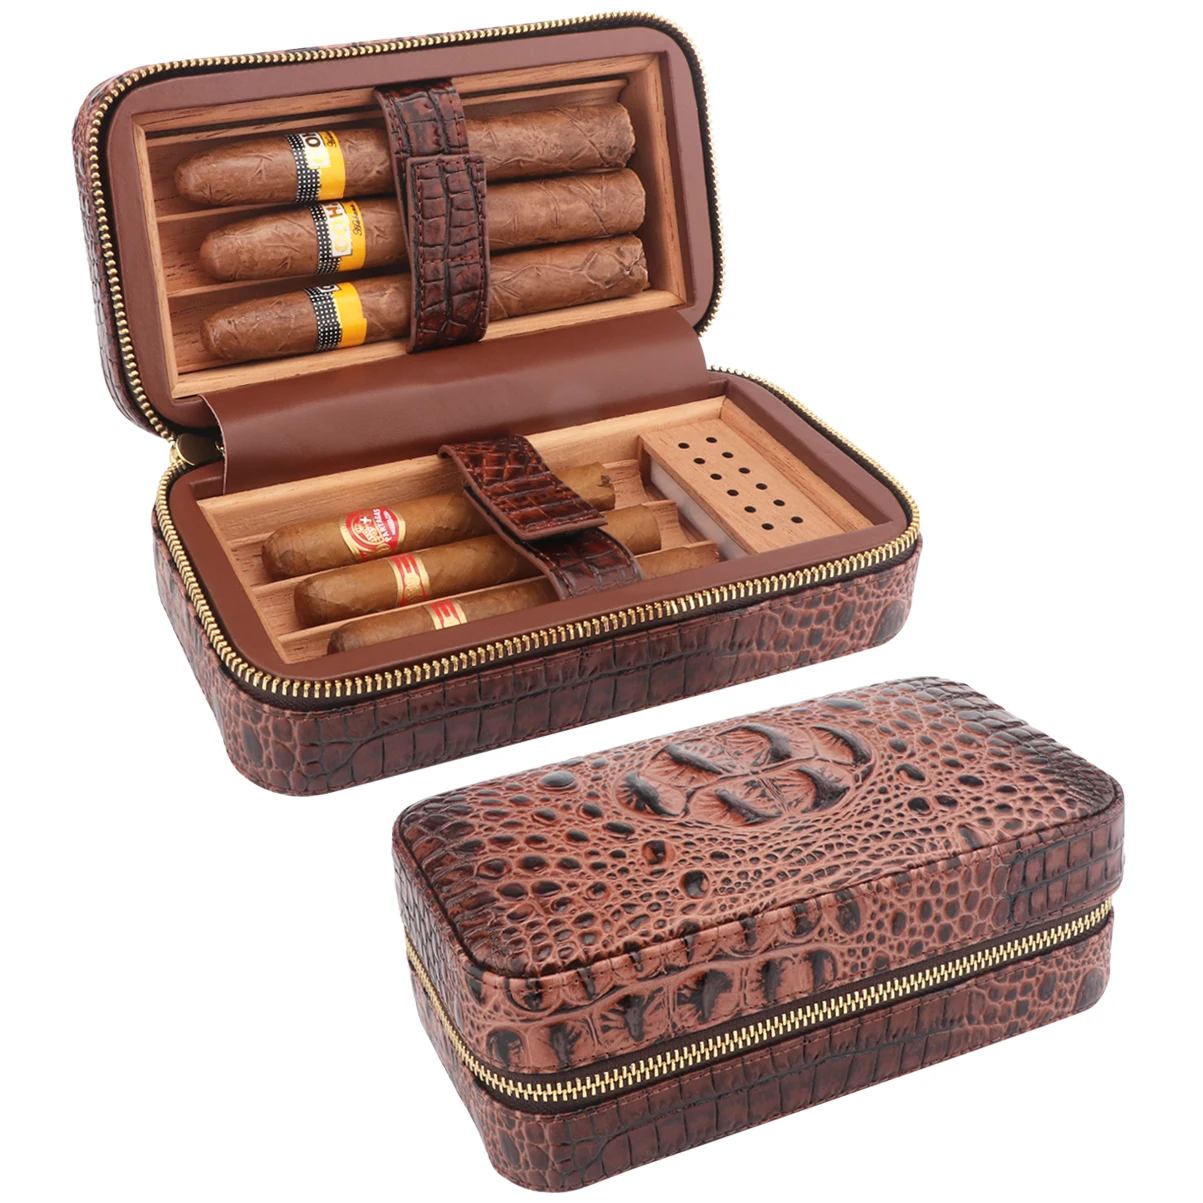 

Travel 6 Slots Leather Cigar Humidor Case Cedar Wood With Humidifier&Dropper Portable Bag Smoking Accessories For COHIBA